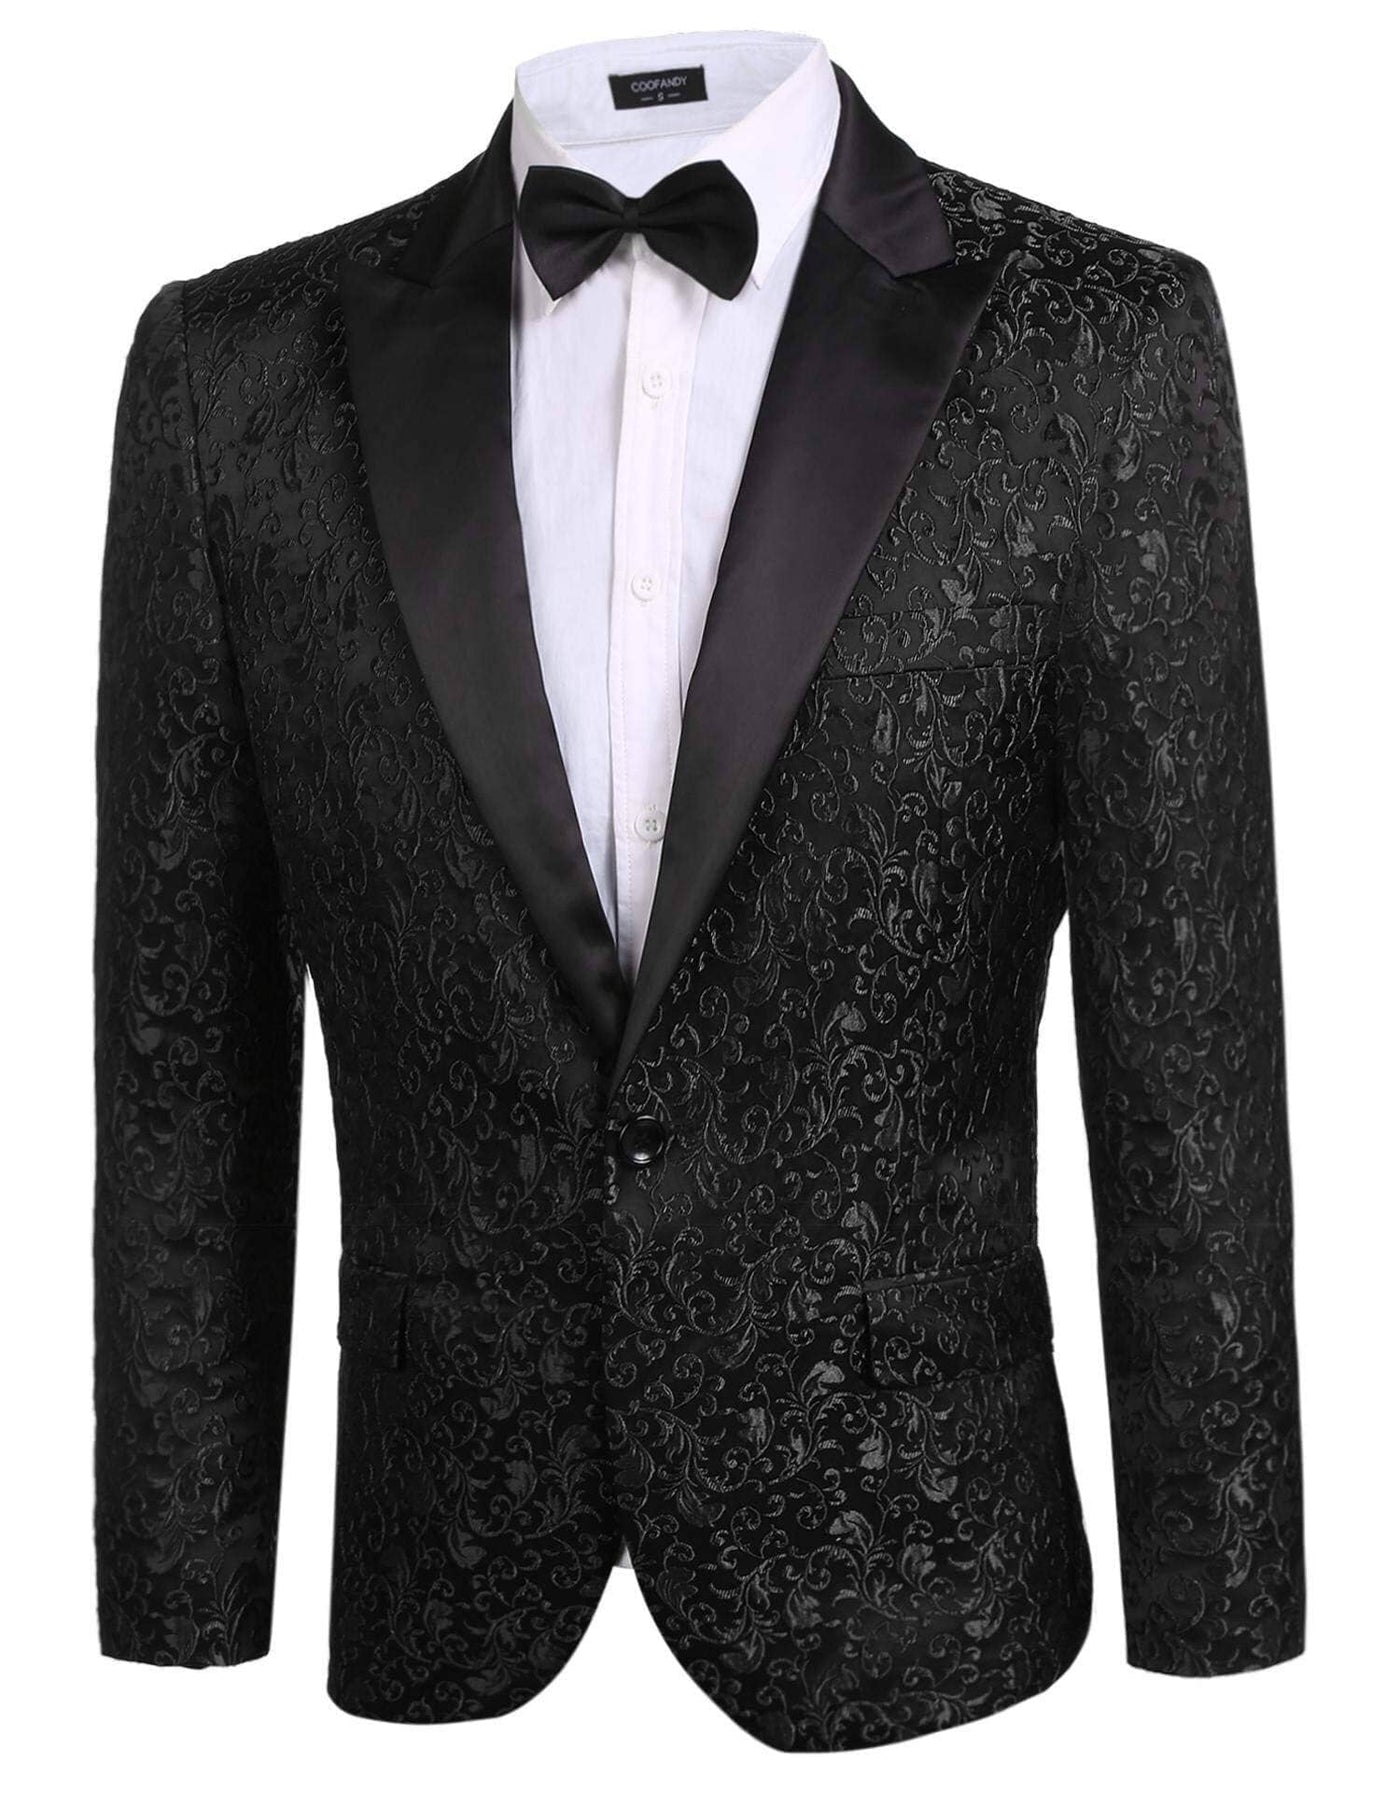 Floral Party Tuxedo - High Quality Jacquard Fabric | Classic ...